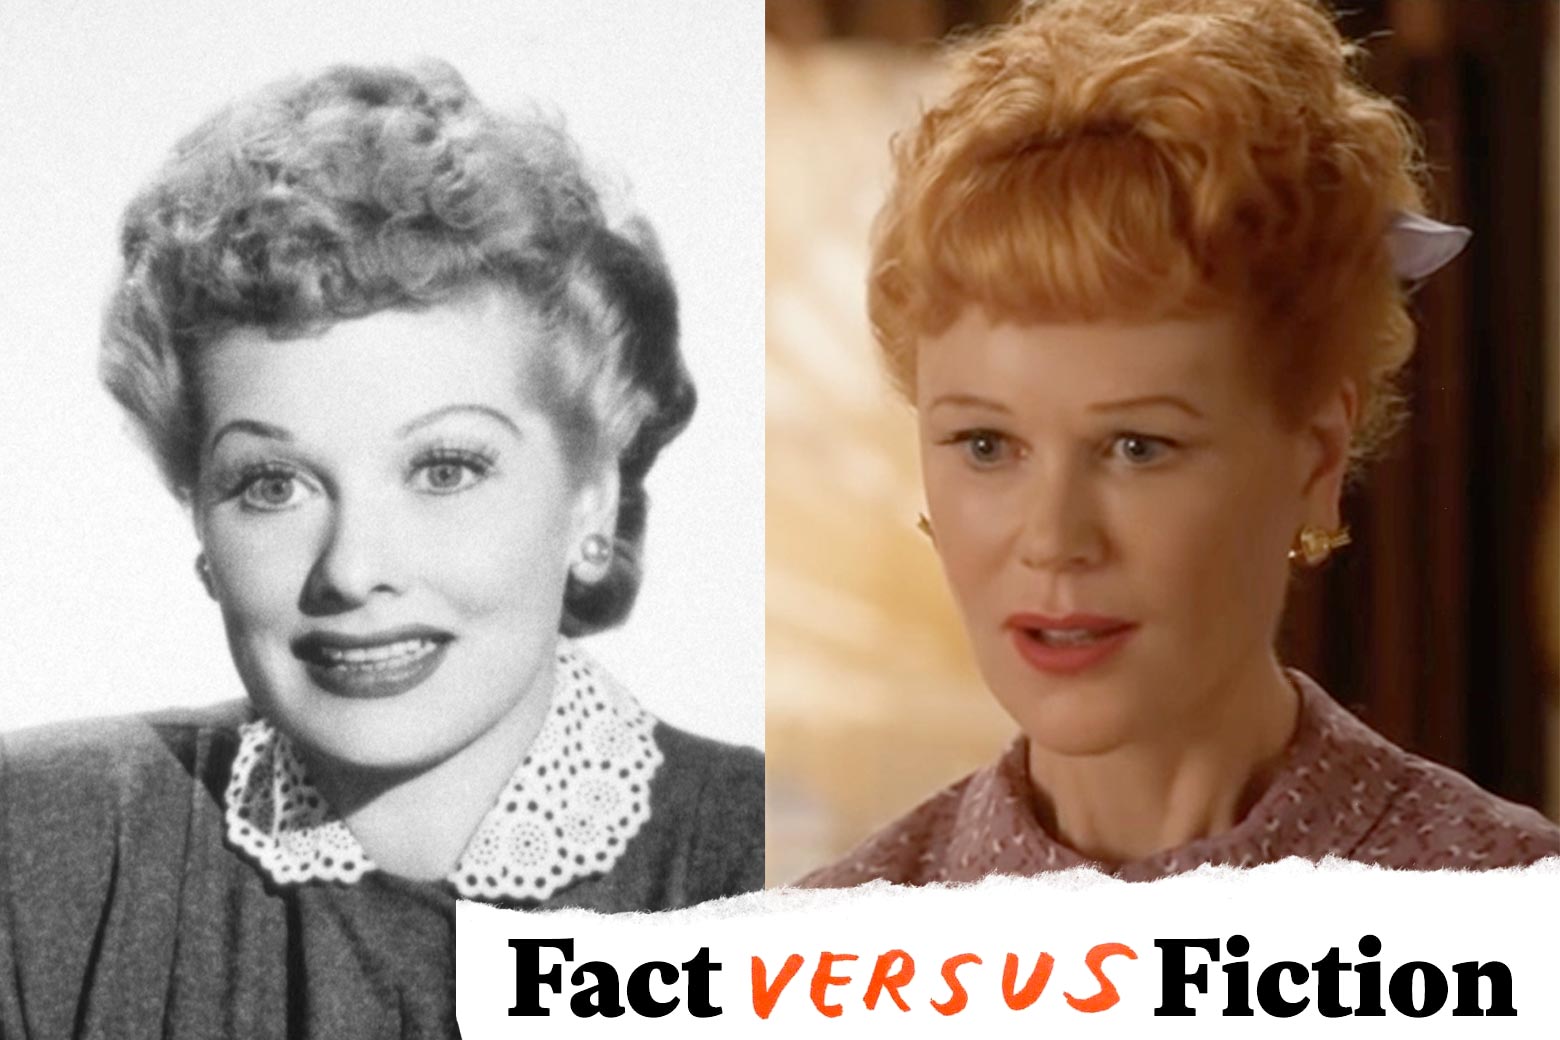 Lucille Ball, in black and white, on the left, and Kidman on the right. They look very similar, though it's clear that for Kidman it required some prosthetics. In the bottom right, a logo says "Fact vs. Fiction."